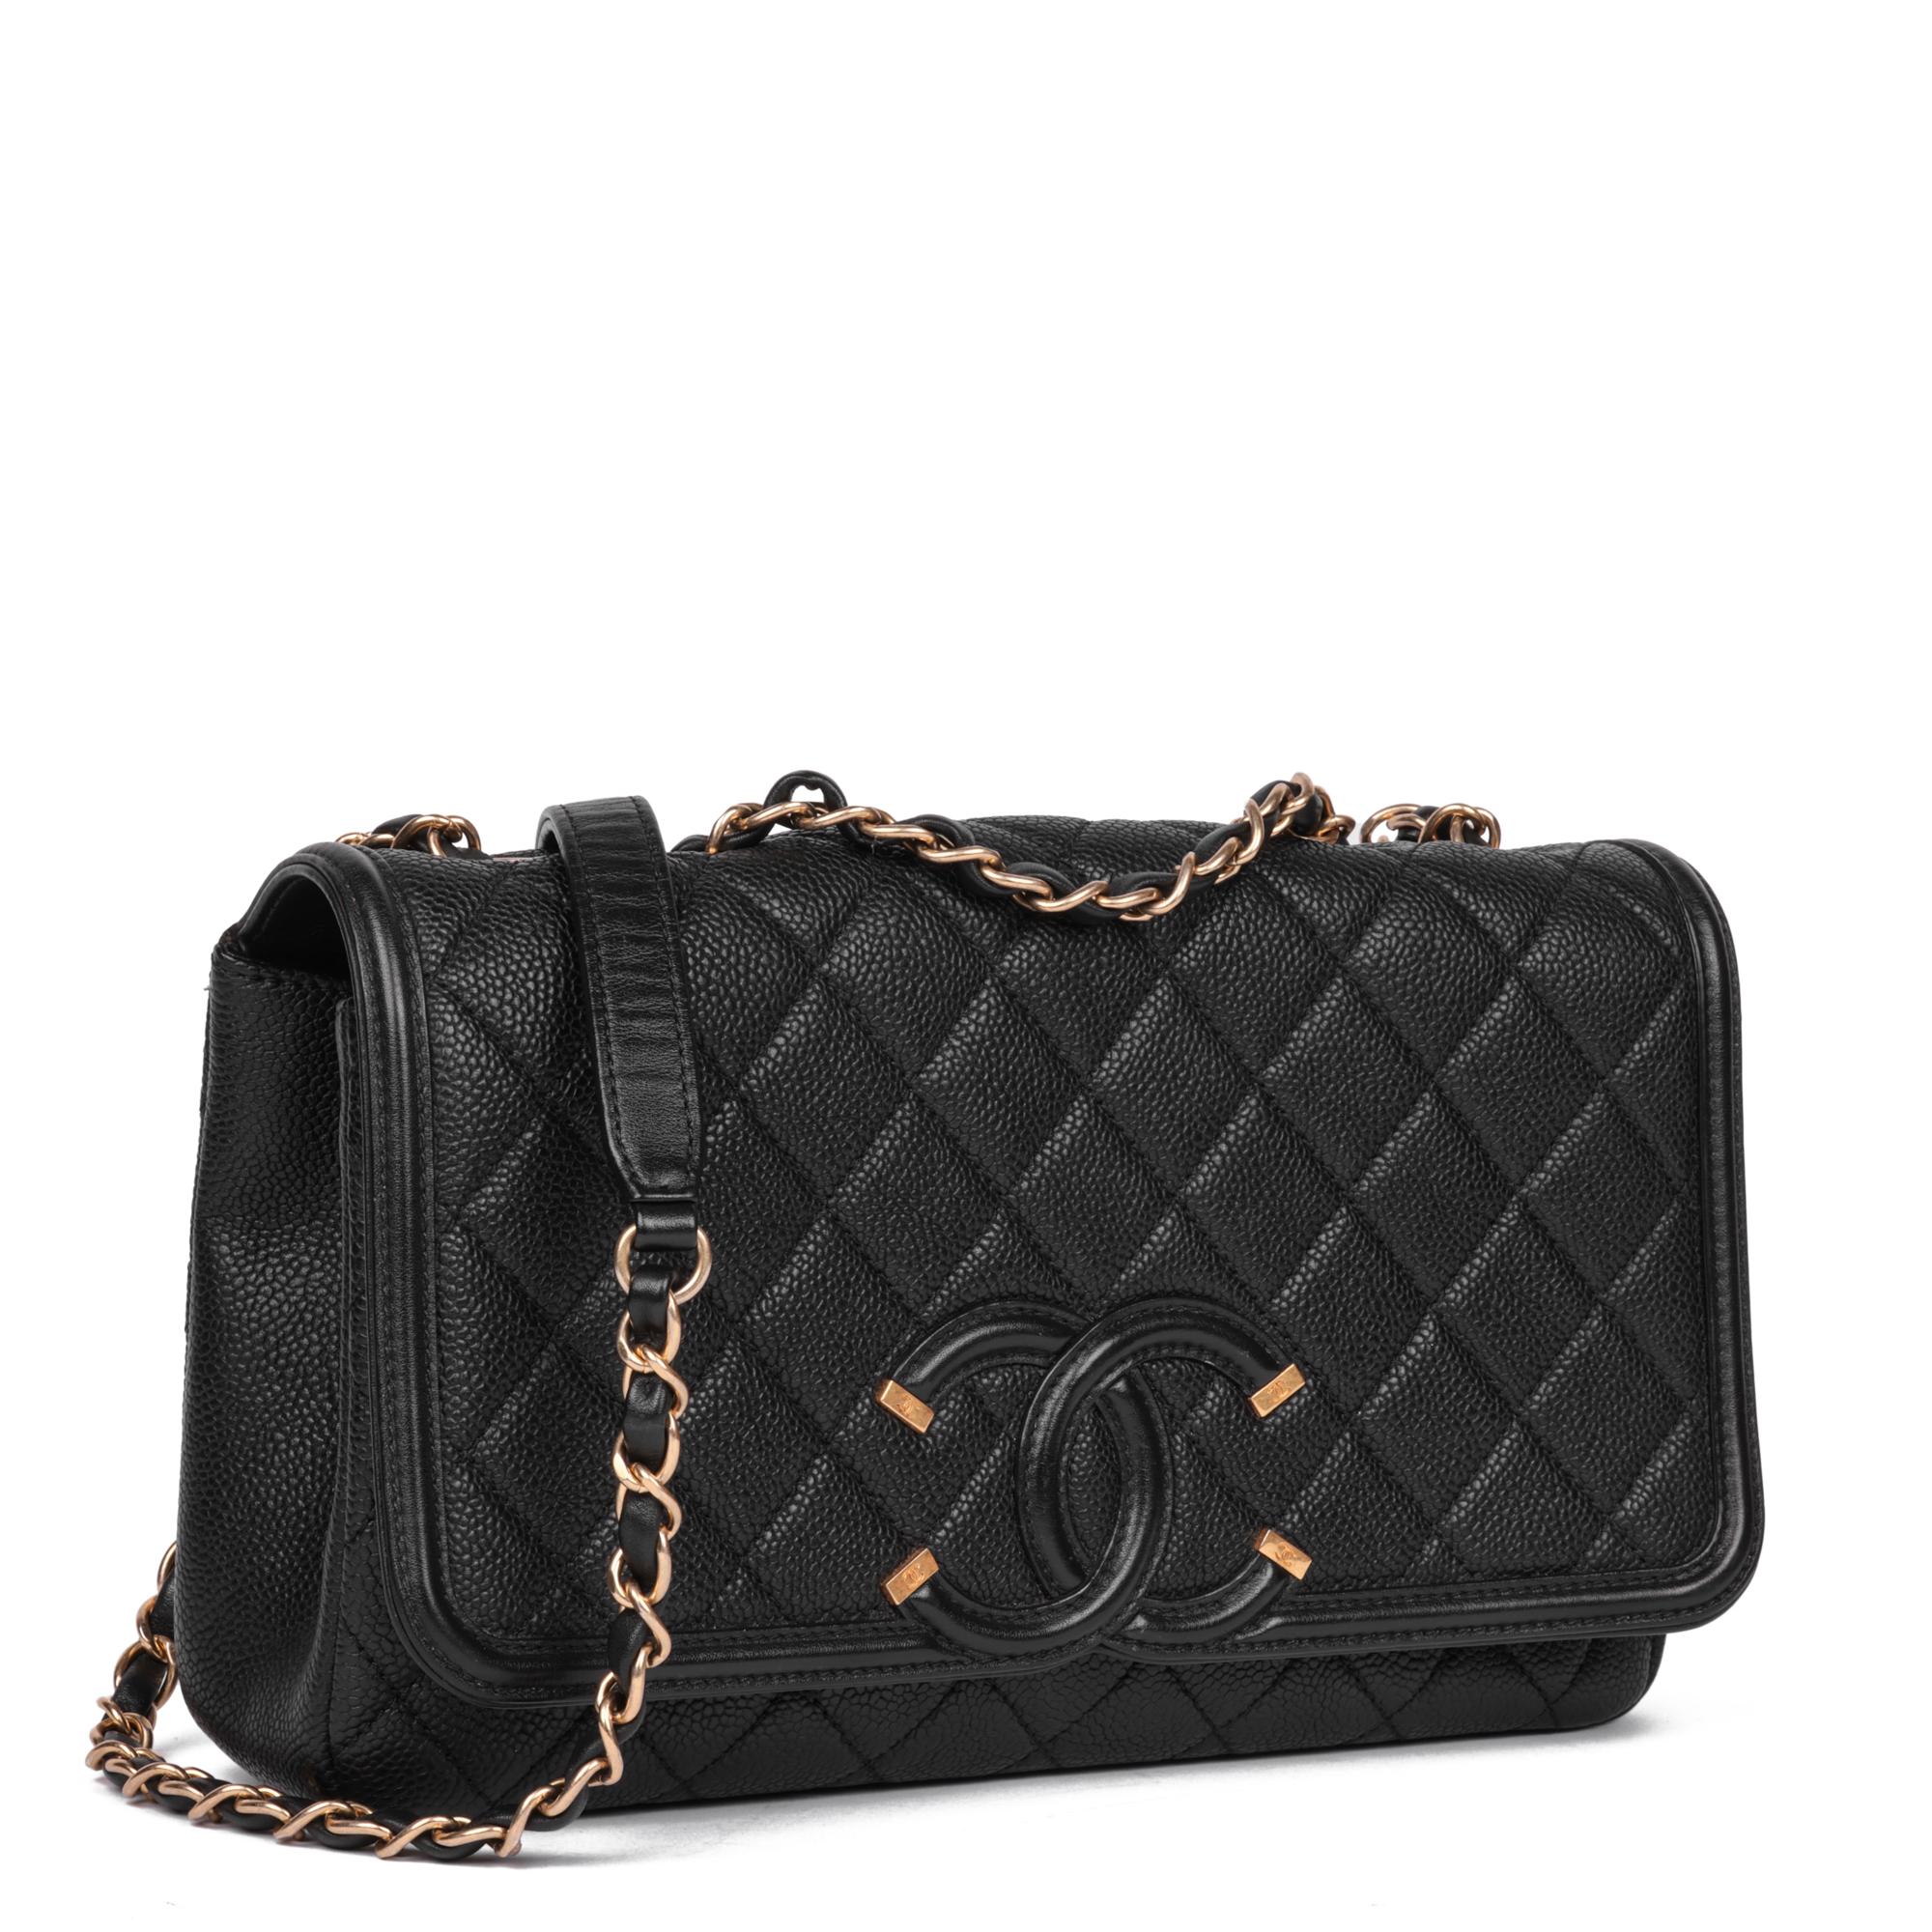 CHANEL
Black Quilted Caviar Leather Medium Filigree Flap Bag

Serial Number: 22644549
Age (Circa): 2017
Accompanied By: Chanel Dust Bag
Authenticity Details: Serial Sticker (Made in Italy)
Gender: Ladies
Type: Shoulder, Crossbody

Colour: